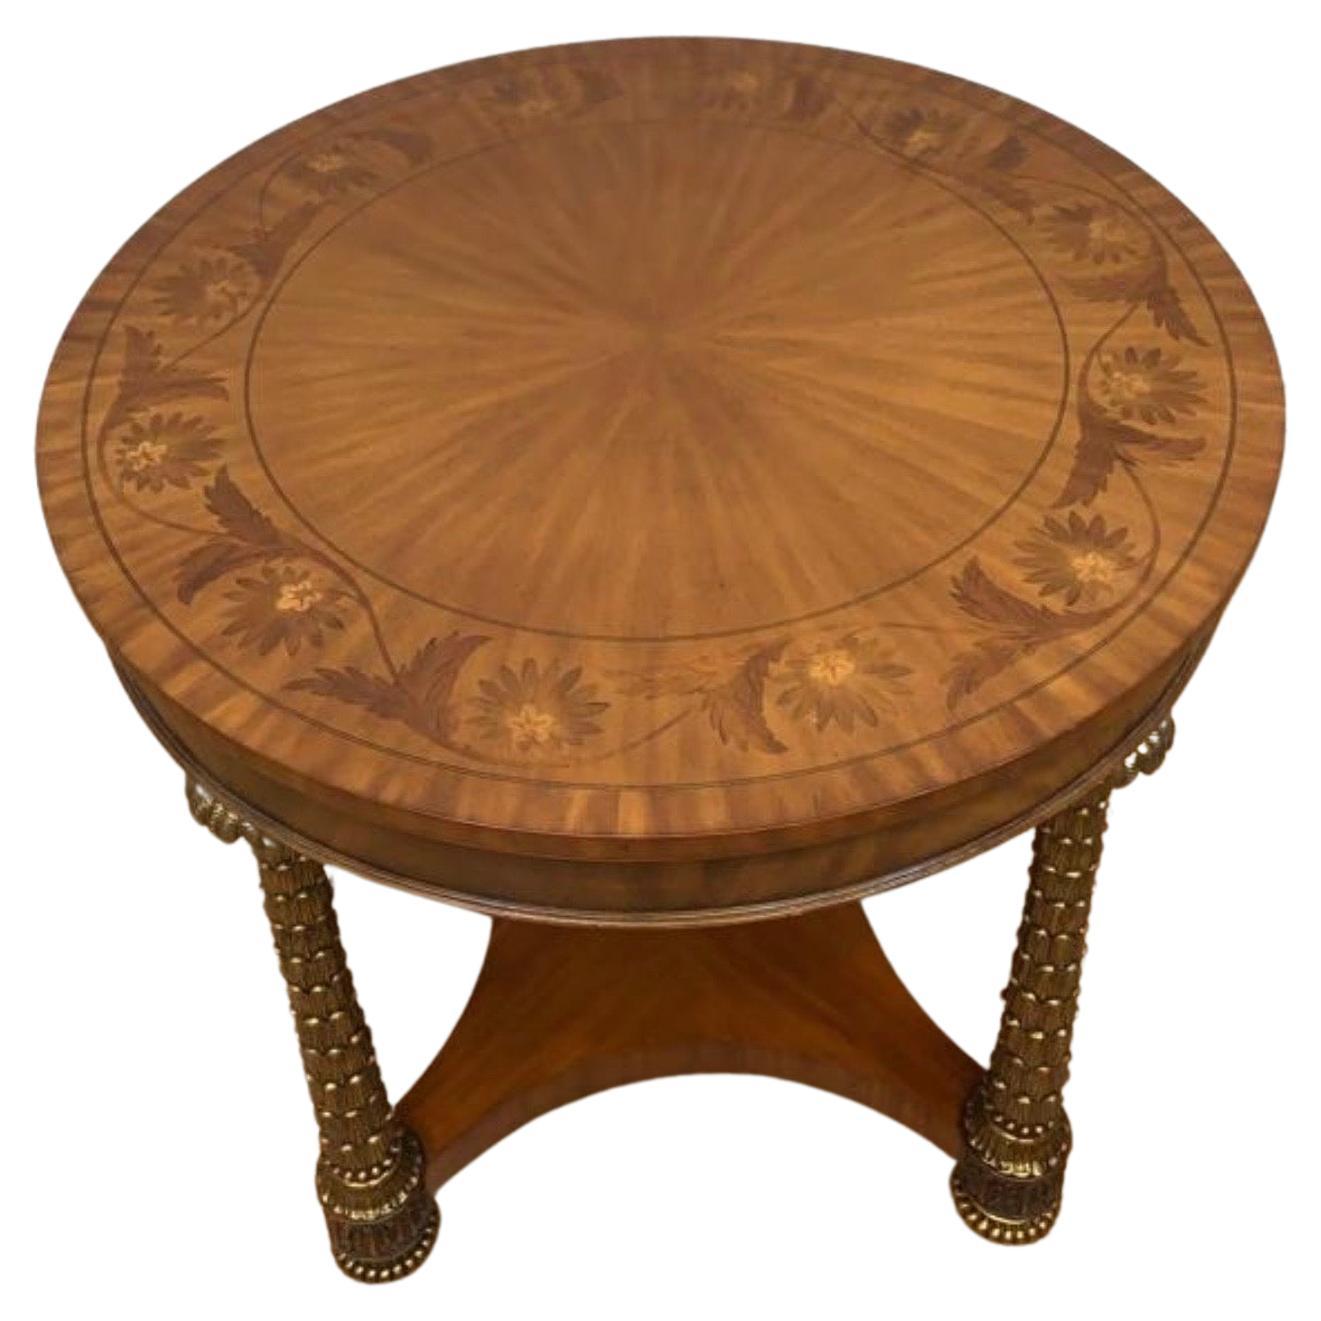 Hollywood Regency Round Brass Palm Tree Legs Accent Table by Maitland Smith

This amazing Hollywood Regency by Maitland Smith round inlaid hall/accent table has beautifully carved legs. The table feature sculpted brass palm tree legs. The table